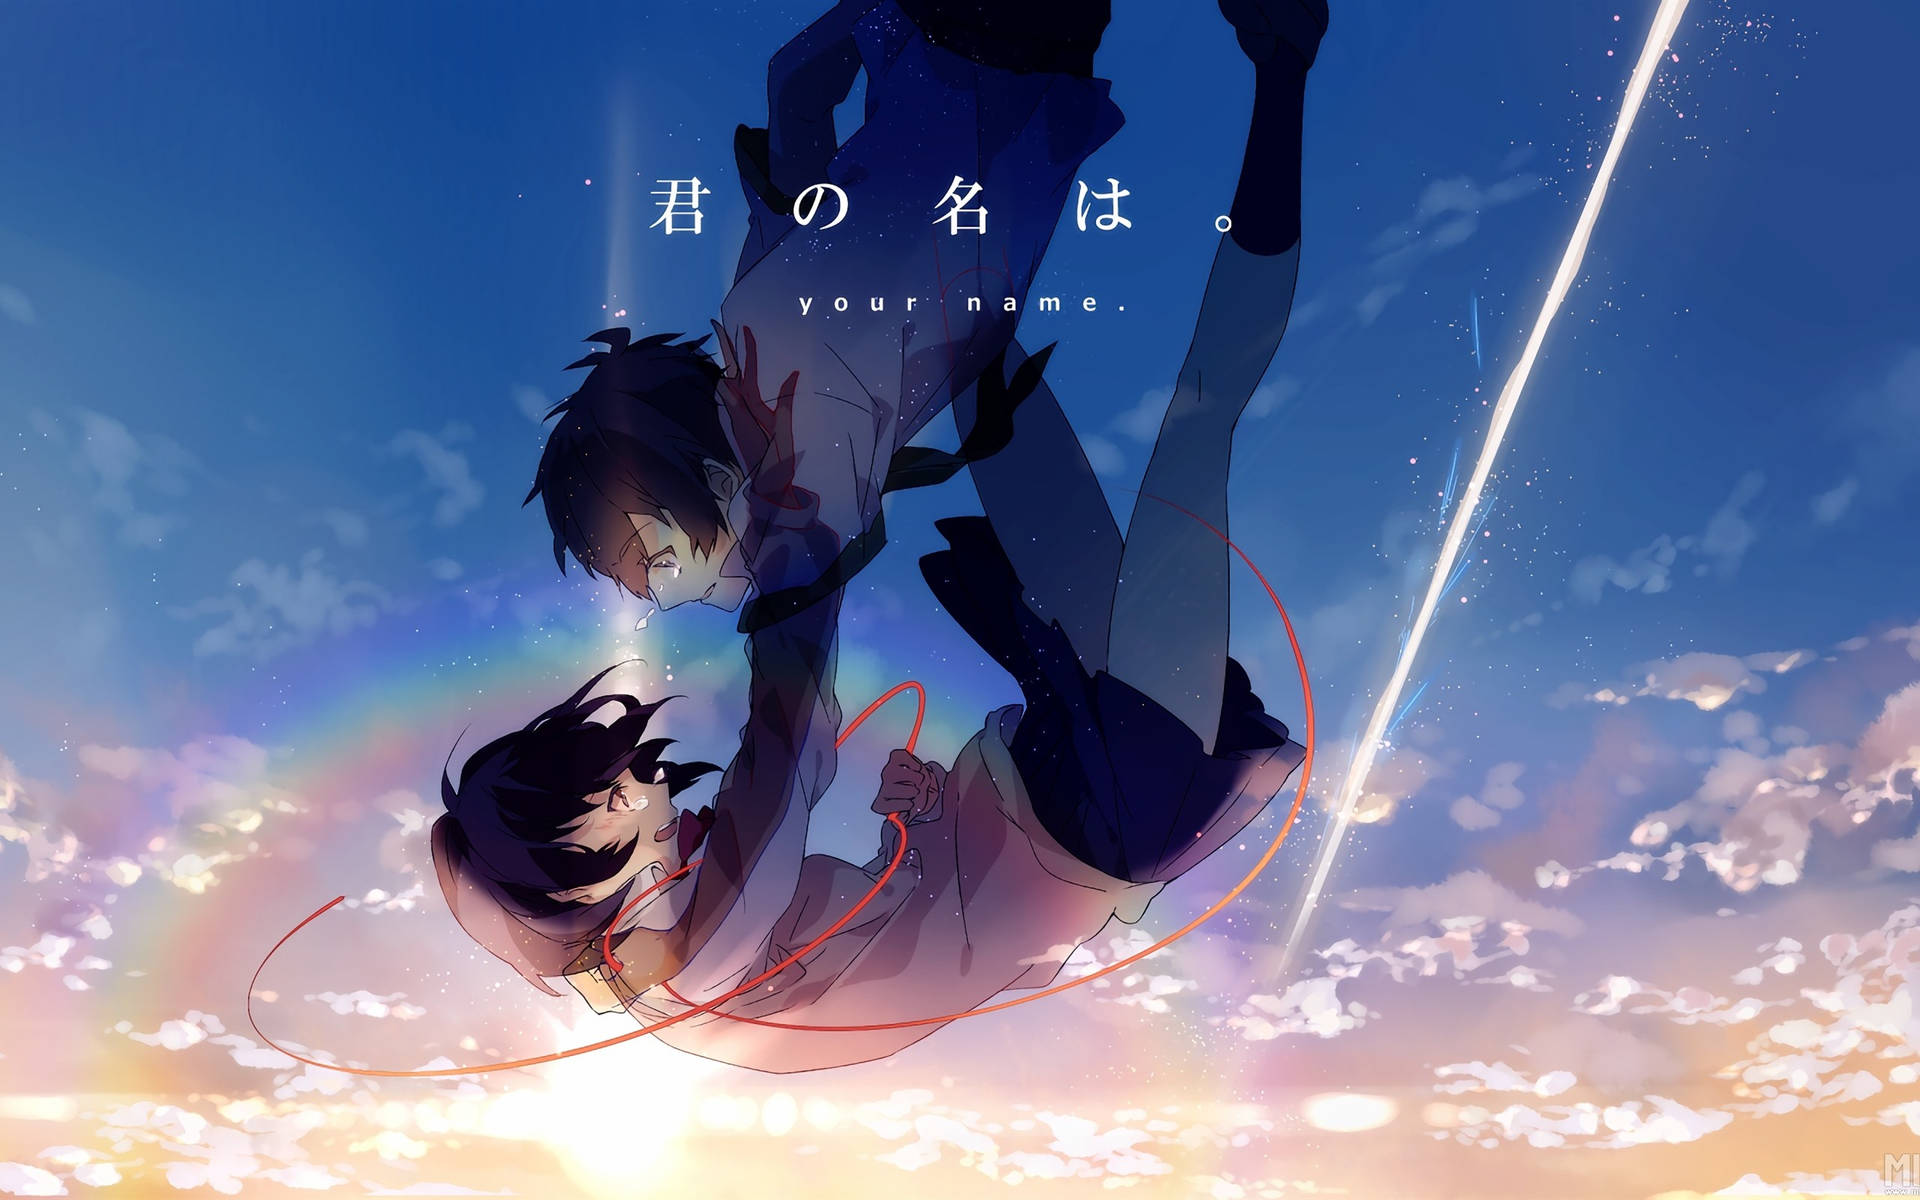 Japanese Anime Film Your Name